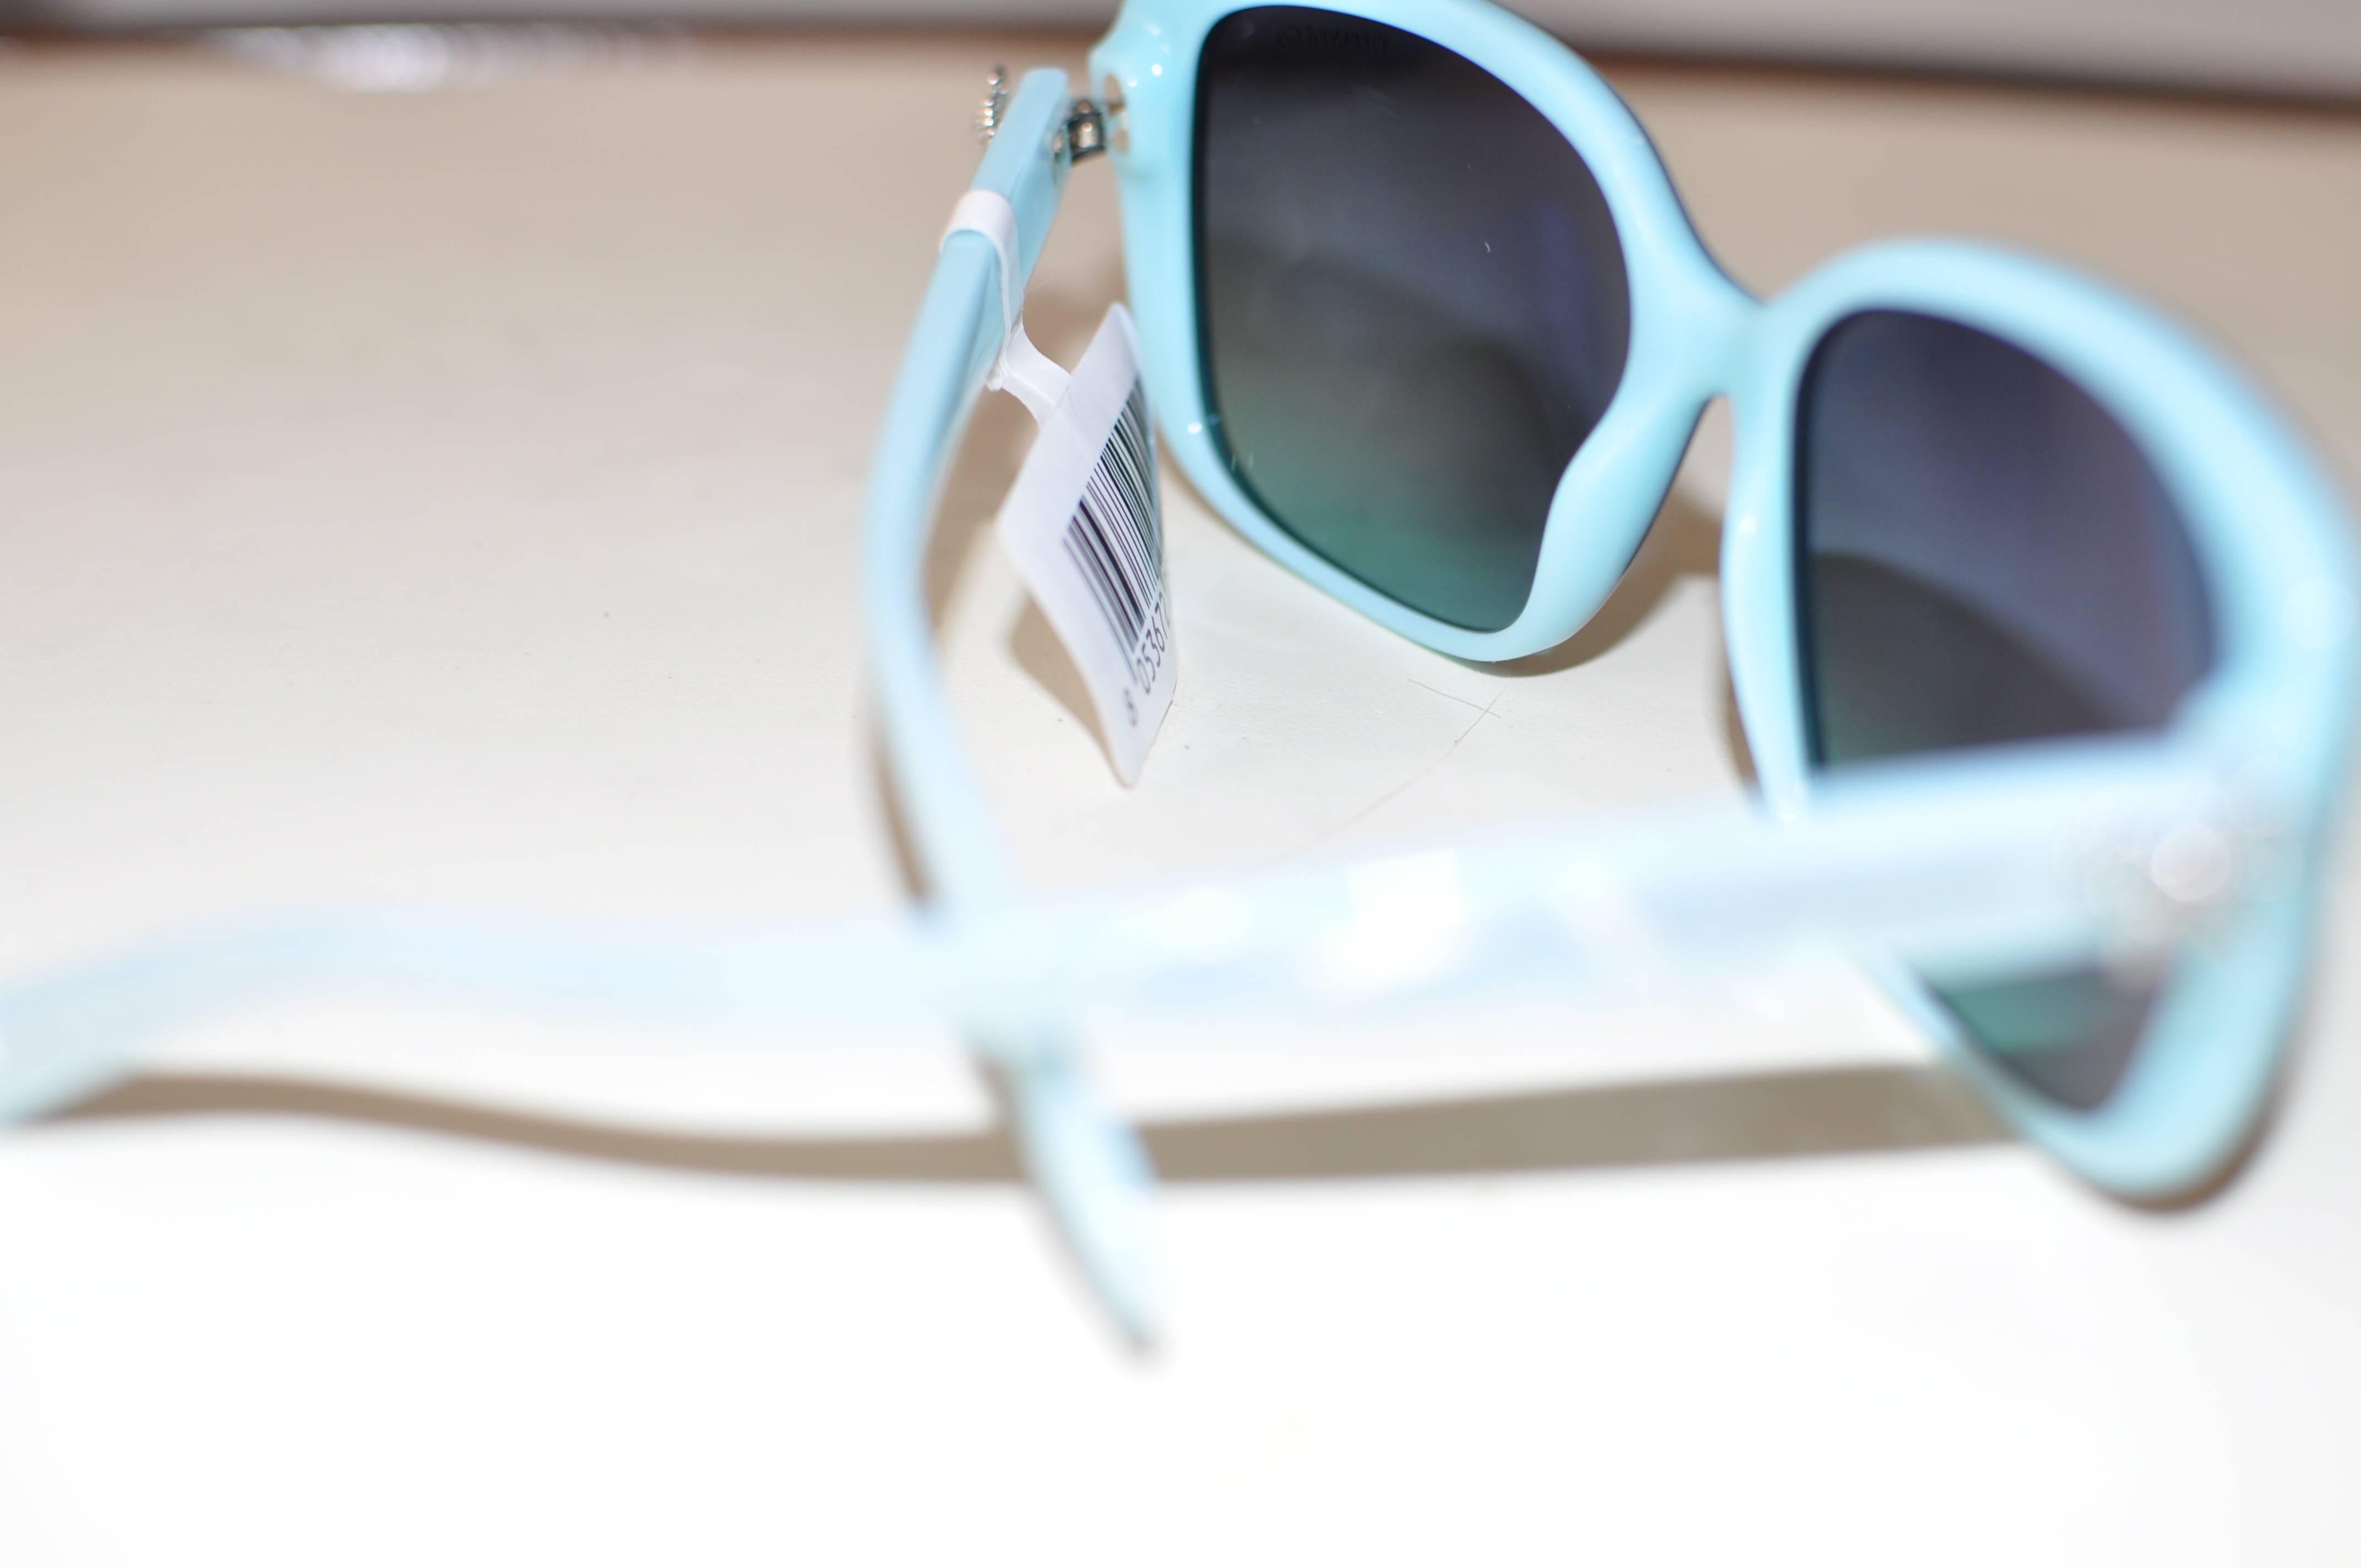 These sunglasses come in Havana and Tiffany Blue acetate with gradient brown lenses, which have 100% UV protection, and anti-glare coating. There are Swarovski crystal bows on the side and silver colored metal accents.

Sold out sunglasses at